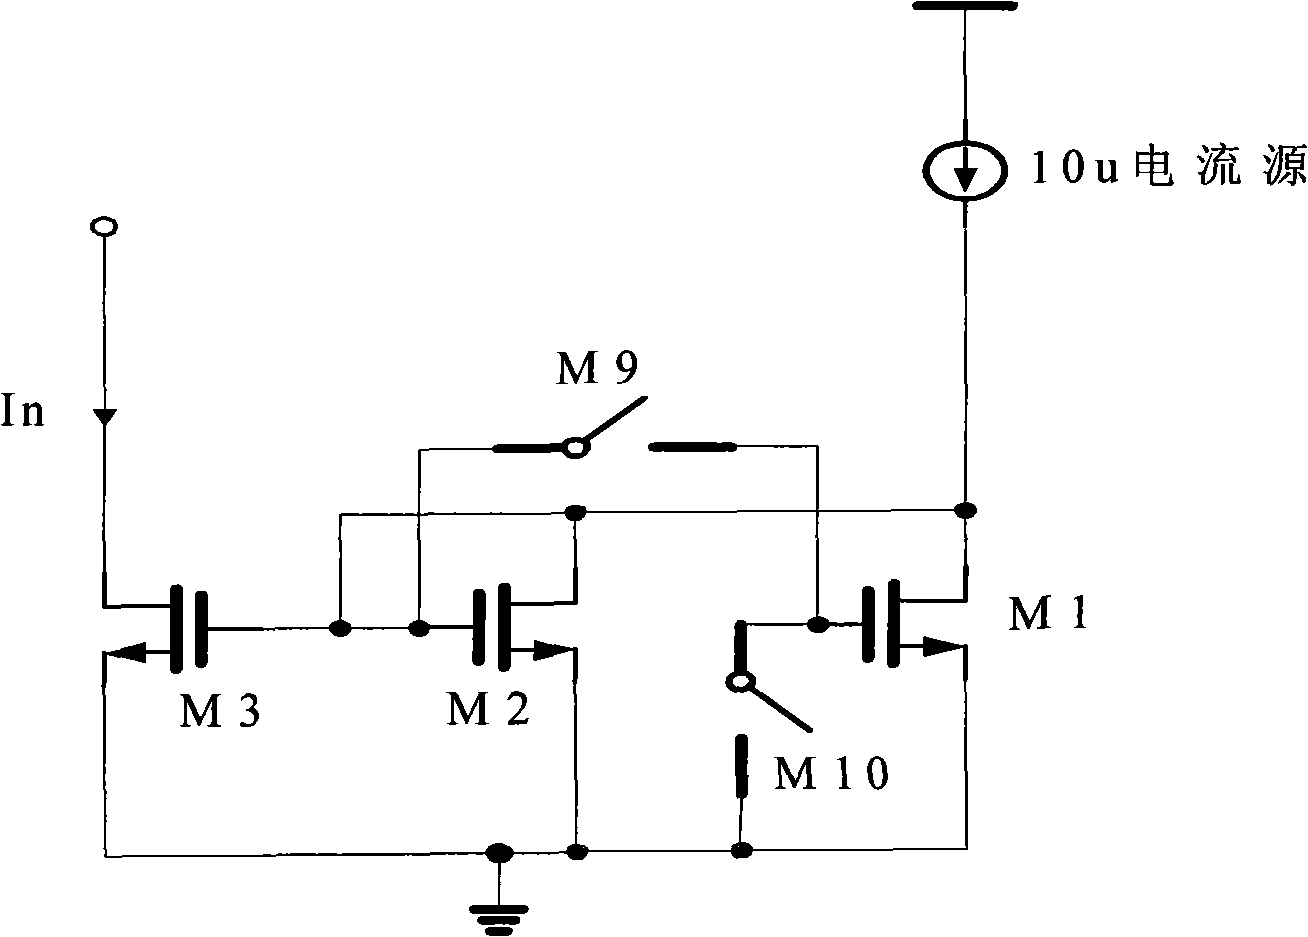 A current-adjustable charge pump circuit